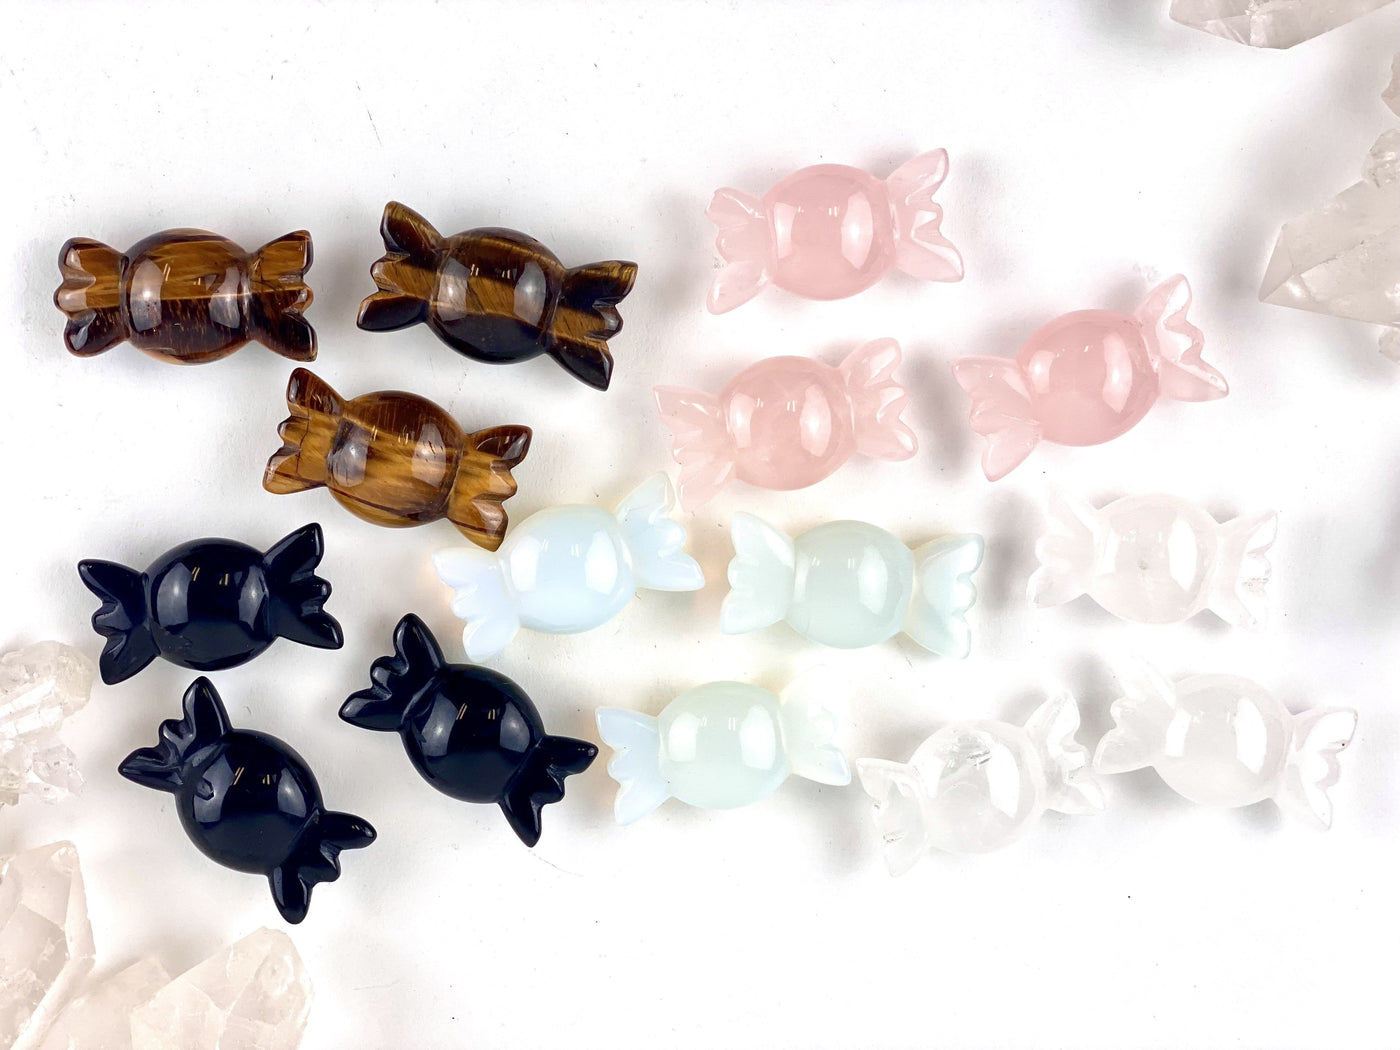 Gemstone Candies set out on a table, 3 of each stone available